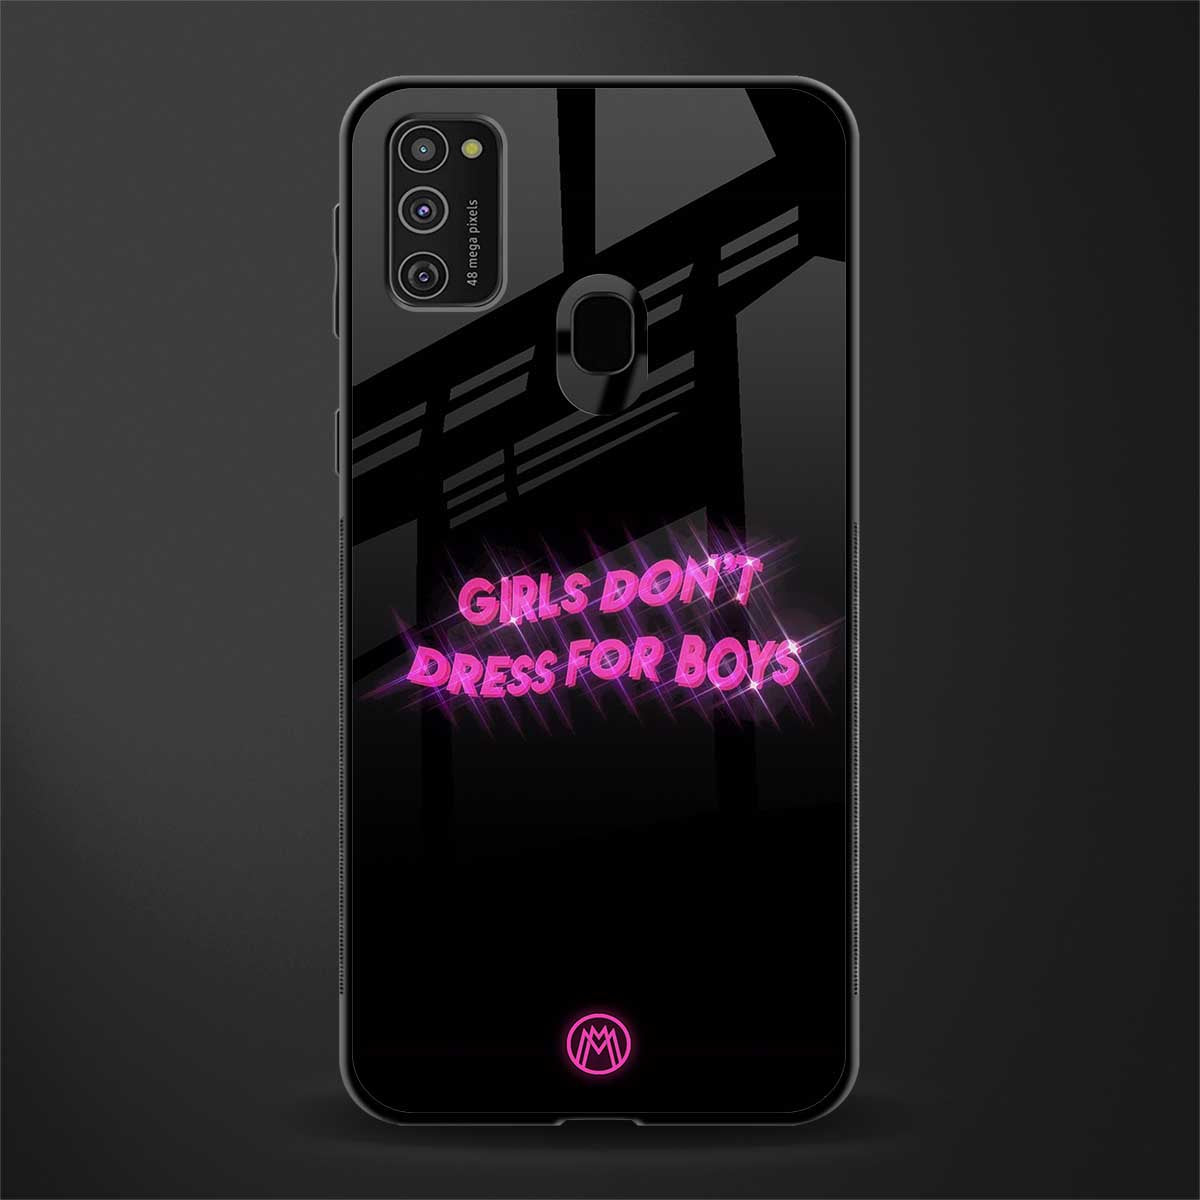 girls don't dress for boys glass case for samsung galaxy m30s image